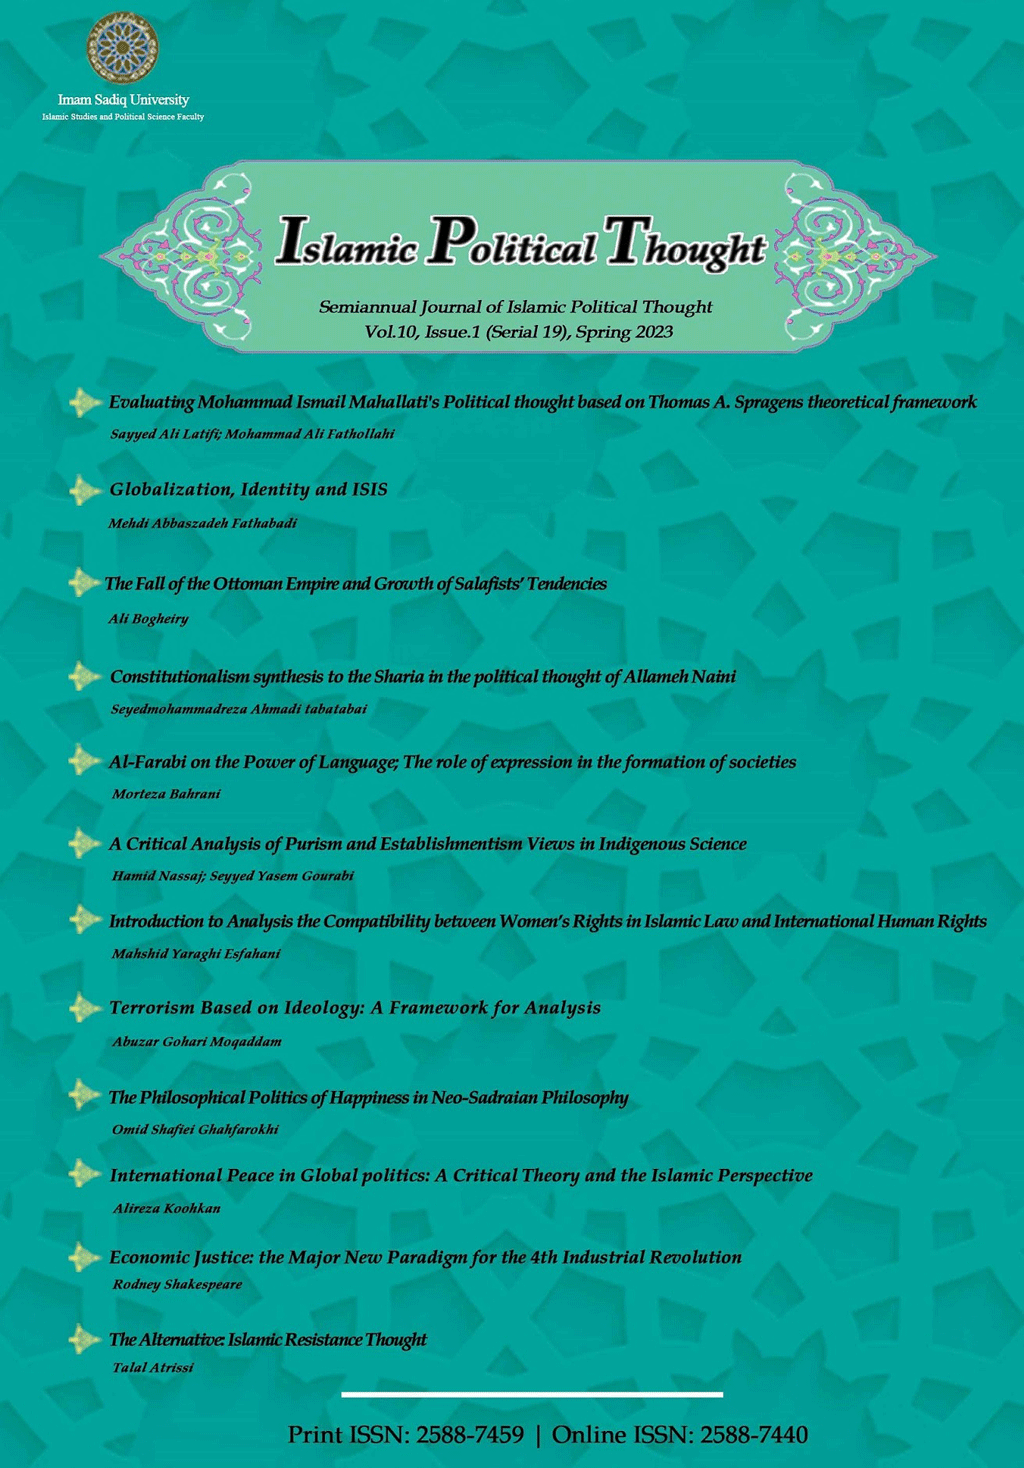 Islamic Political Thoughts - Fall 2017, Volume 4 - Number 2